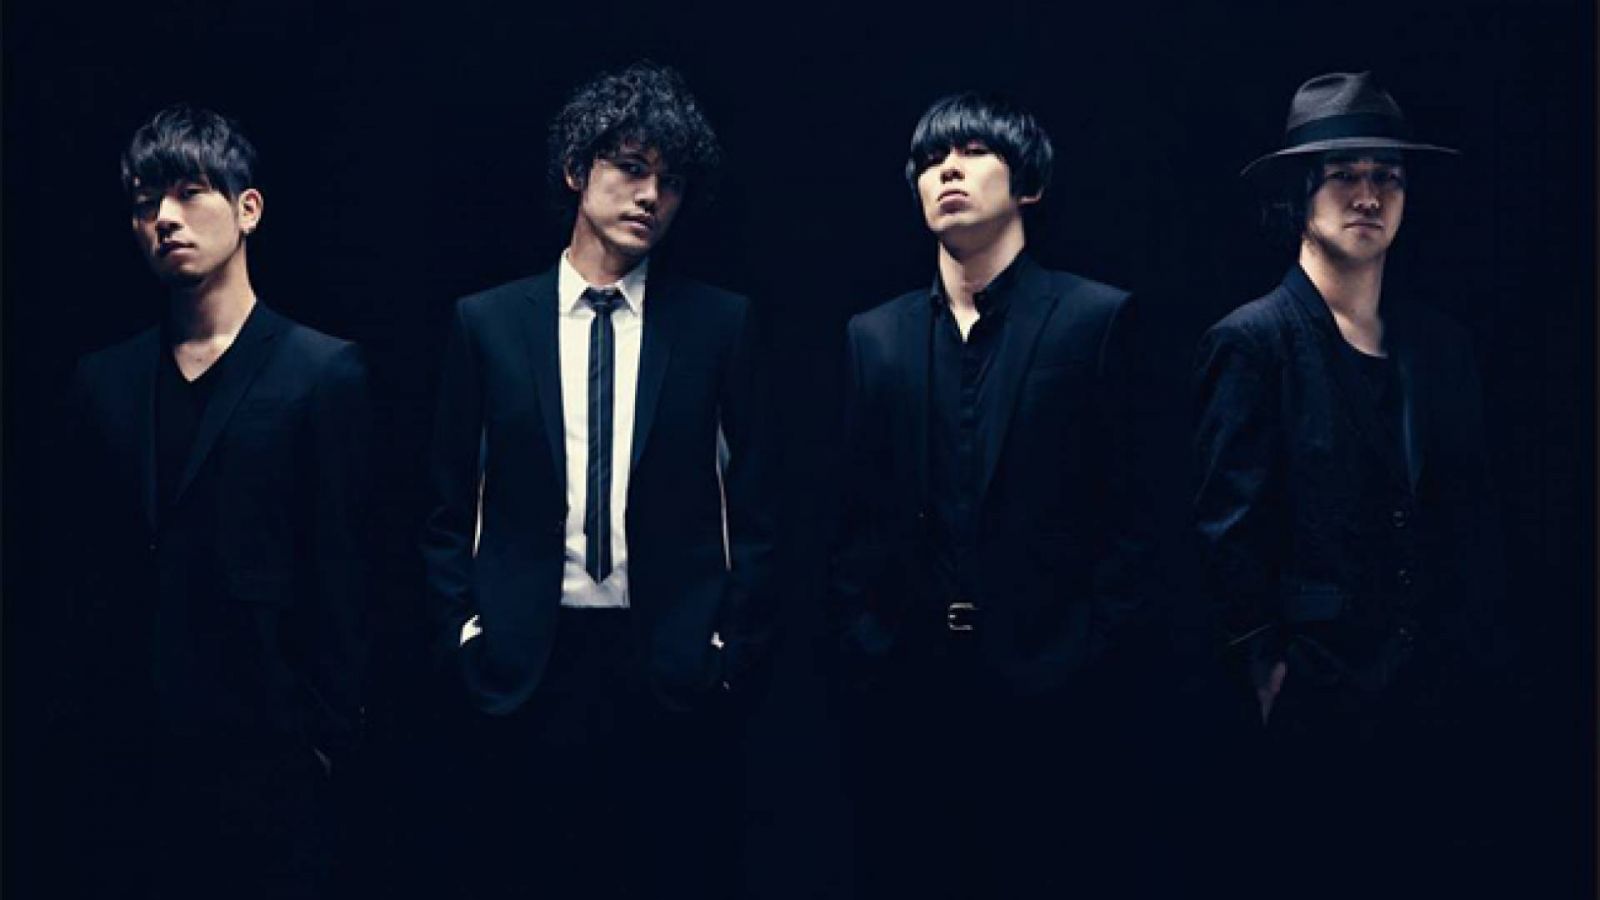 Nowy singiel 9mm Parabellum Bullet © 9mm Parabellum Bullet. All Rights Reserved.